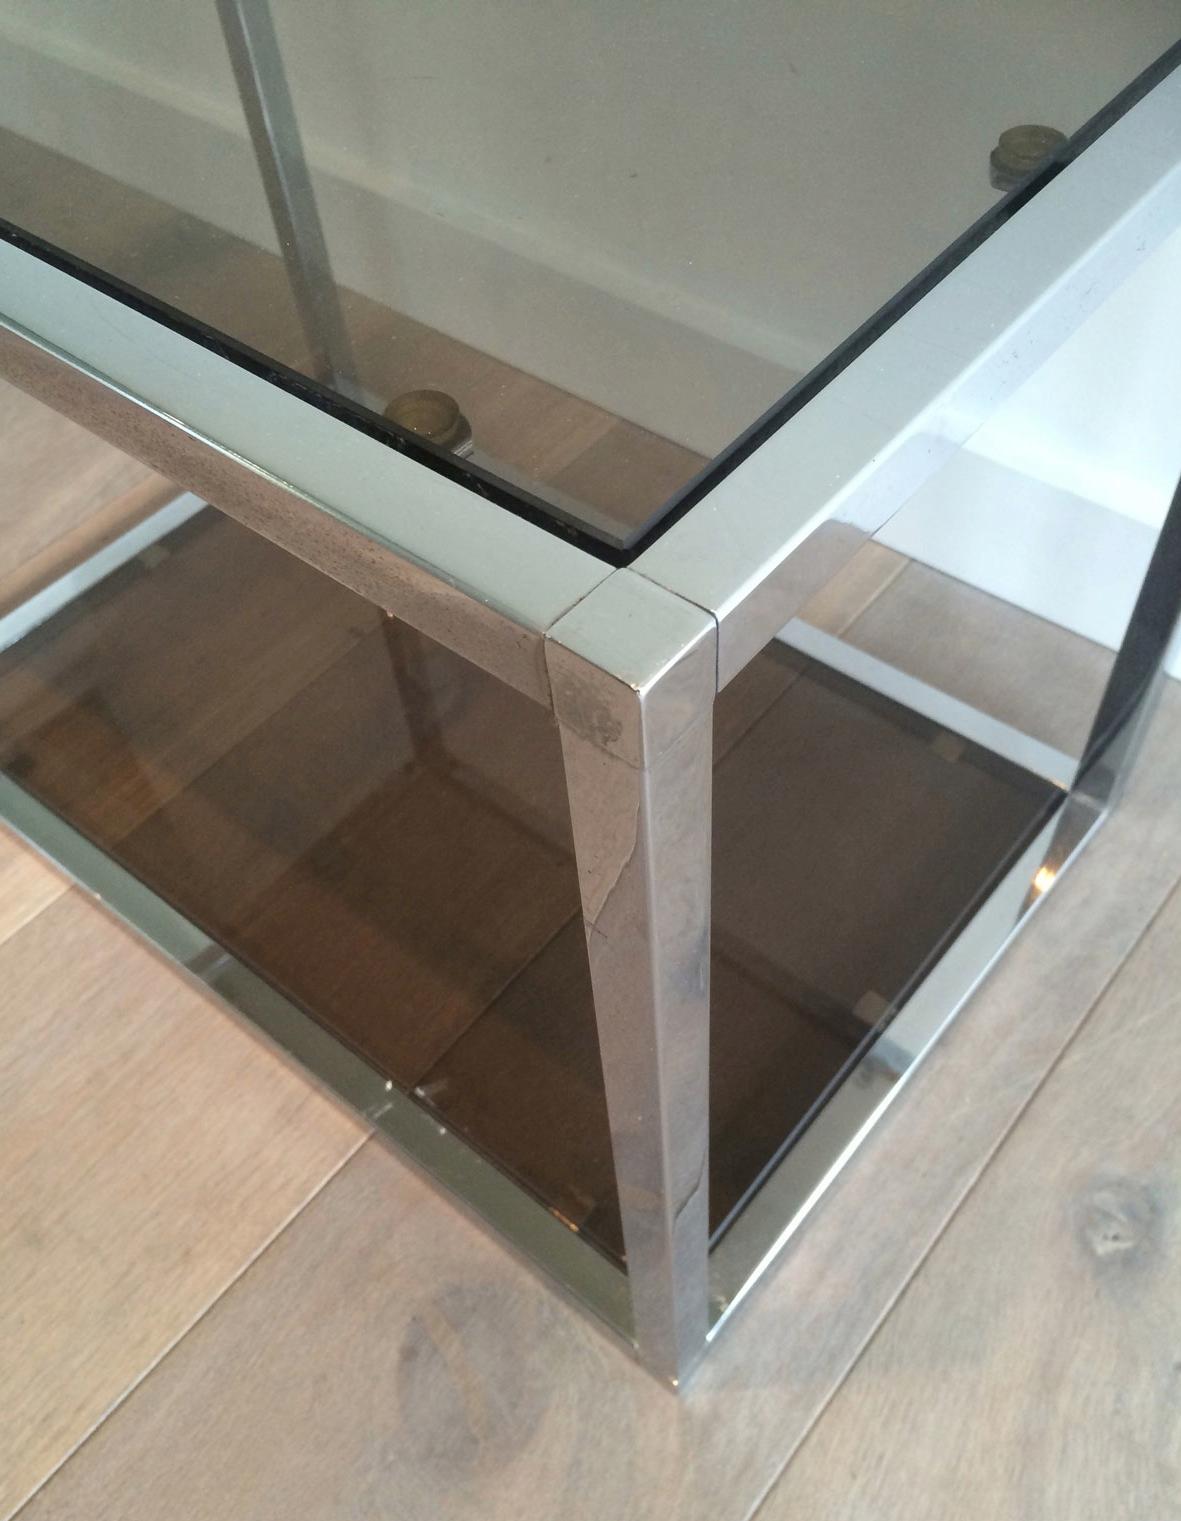 Pair of Chrome Side Tables with Smoked Glasses, circa 1970 For Sale 1